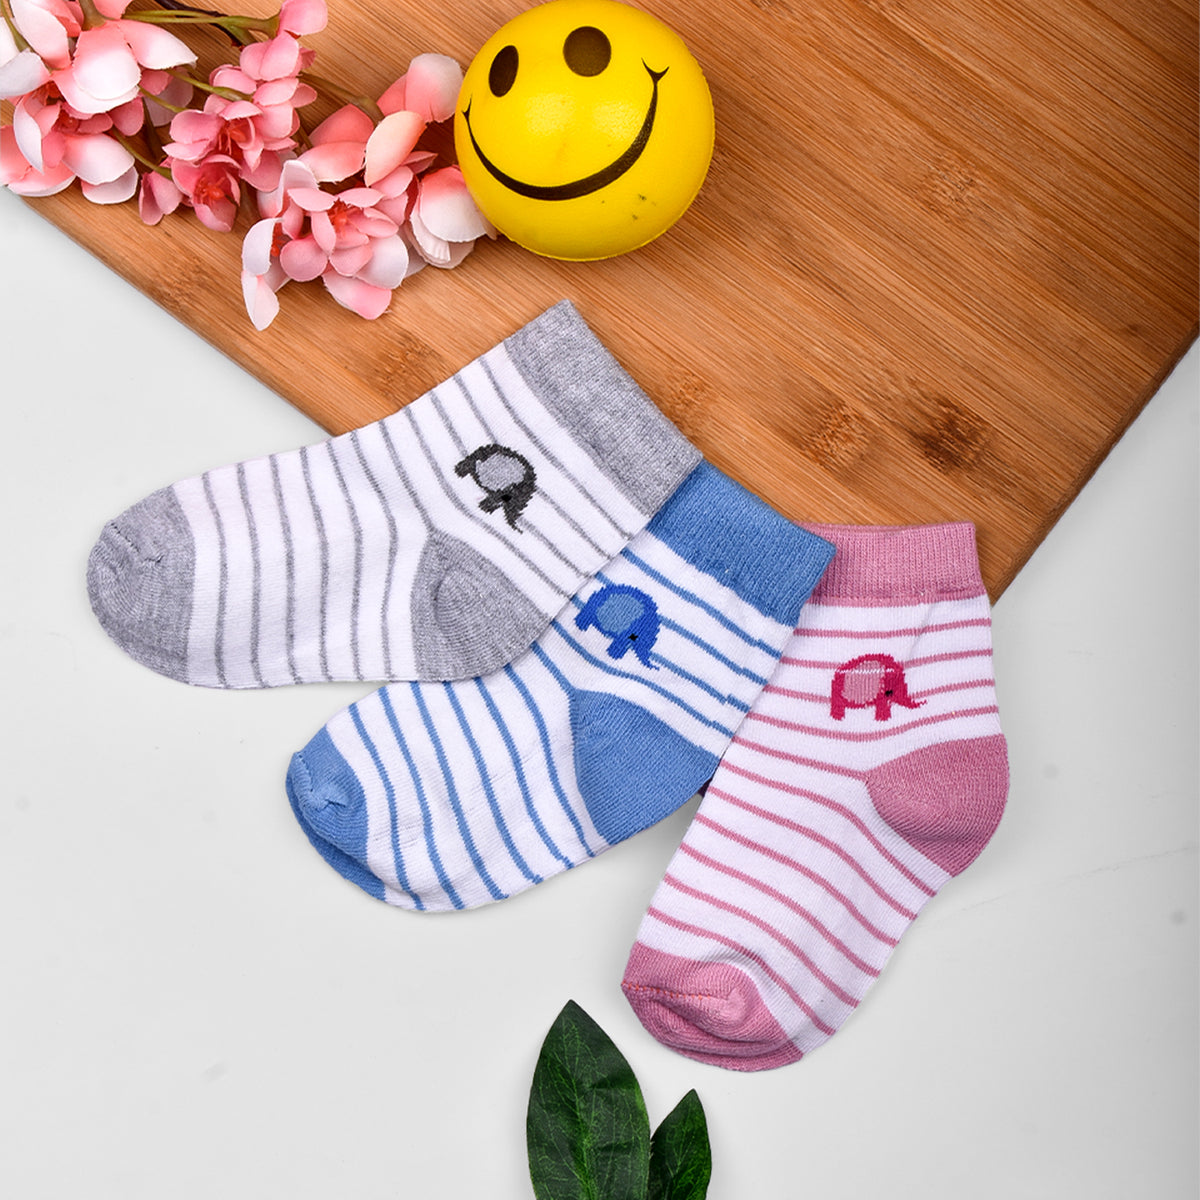 FOOTPRINTS Baby's Organic Colourful Stripes Cotton Socks (6-12 Months) -Pack of 3 Pairs - Baby Eleplant